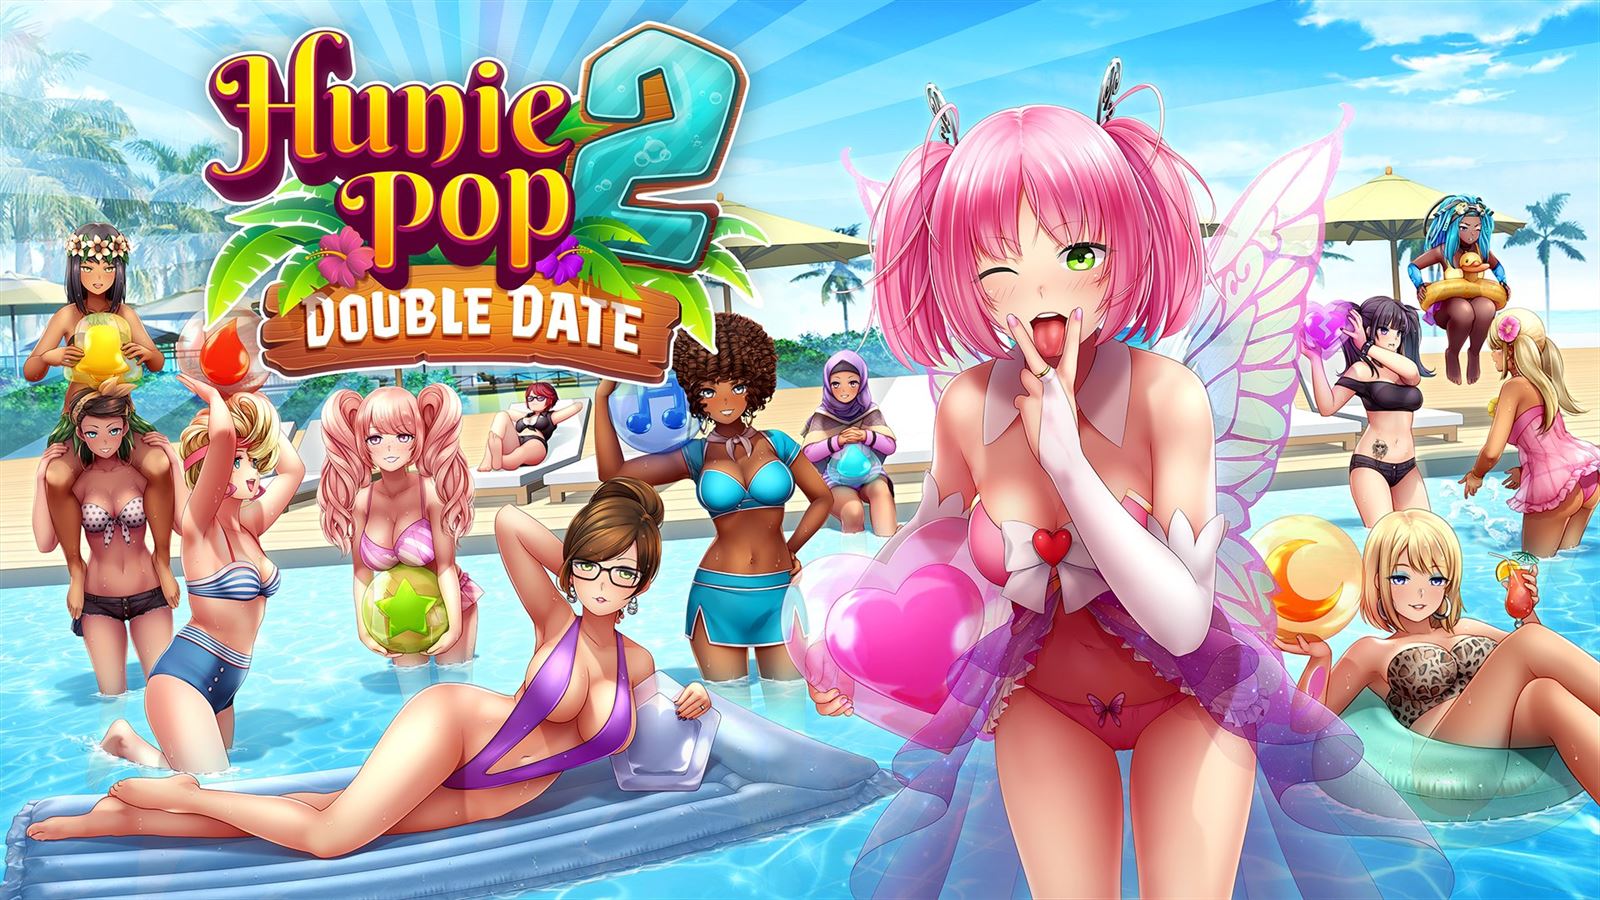 Unity] HuniePop 2 Double Date - v1.1.0 Deluxe Edition by Huniepot 18+ Adult  xxx Porn Game Download